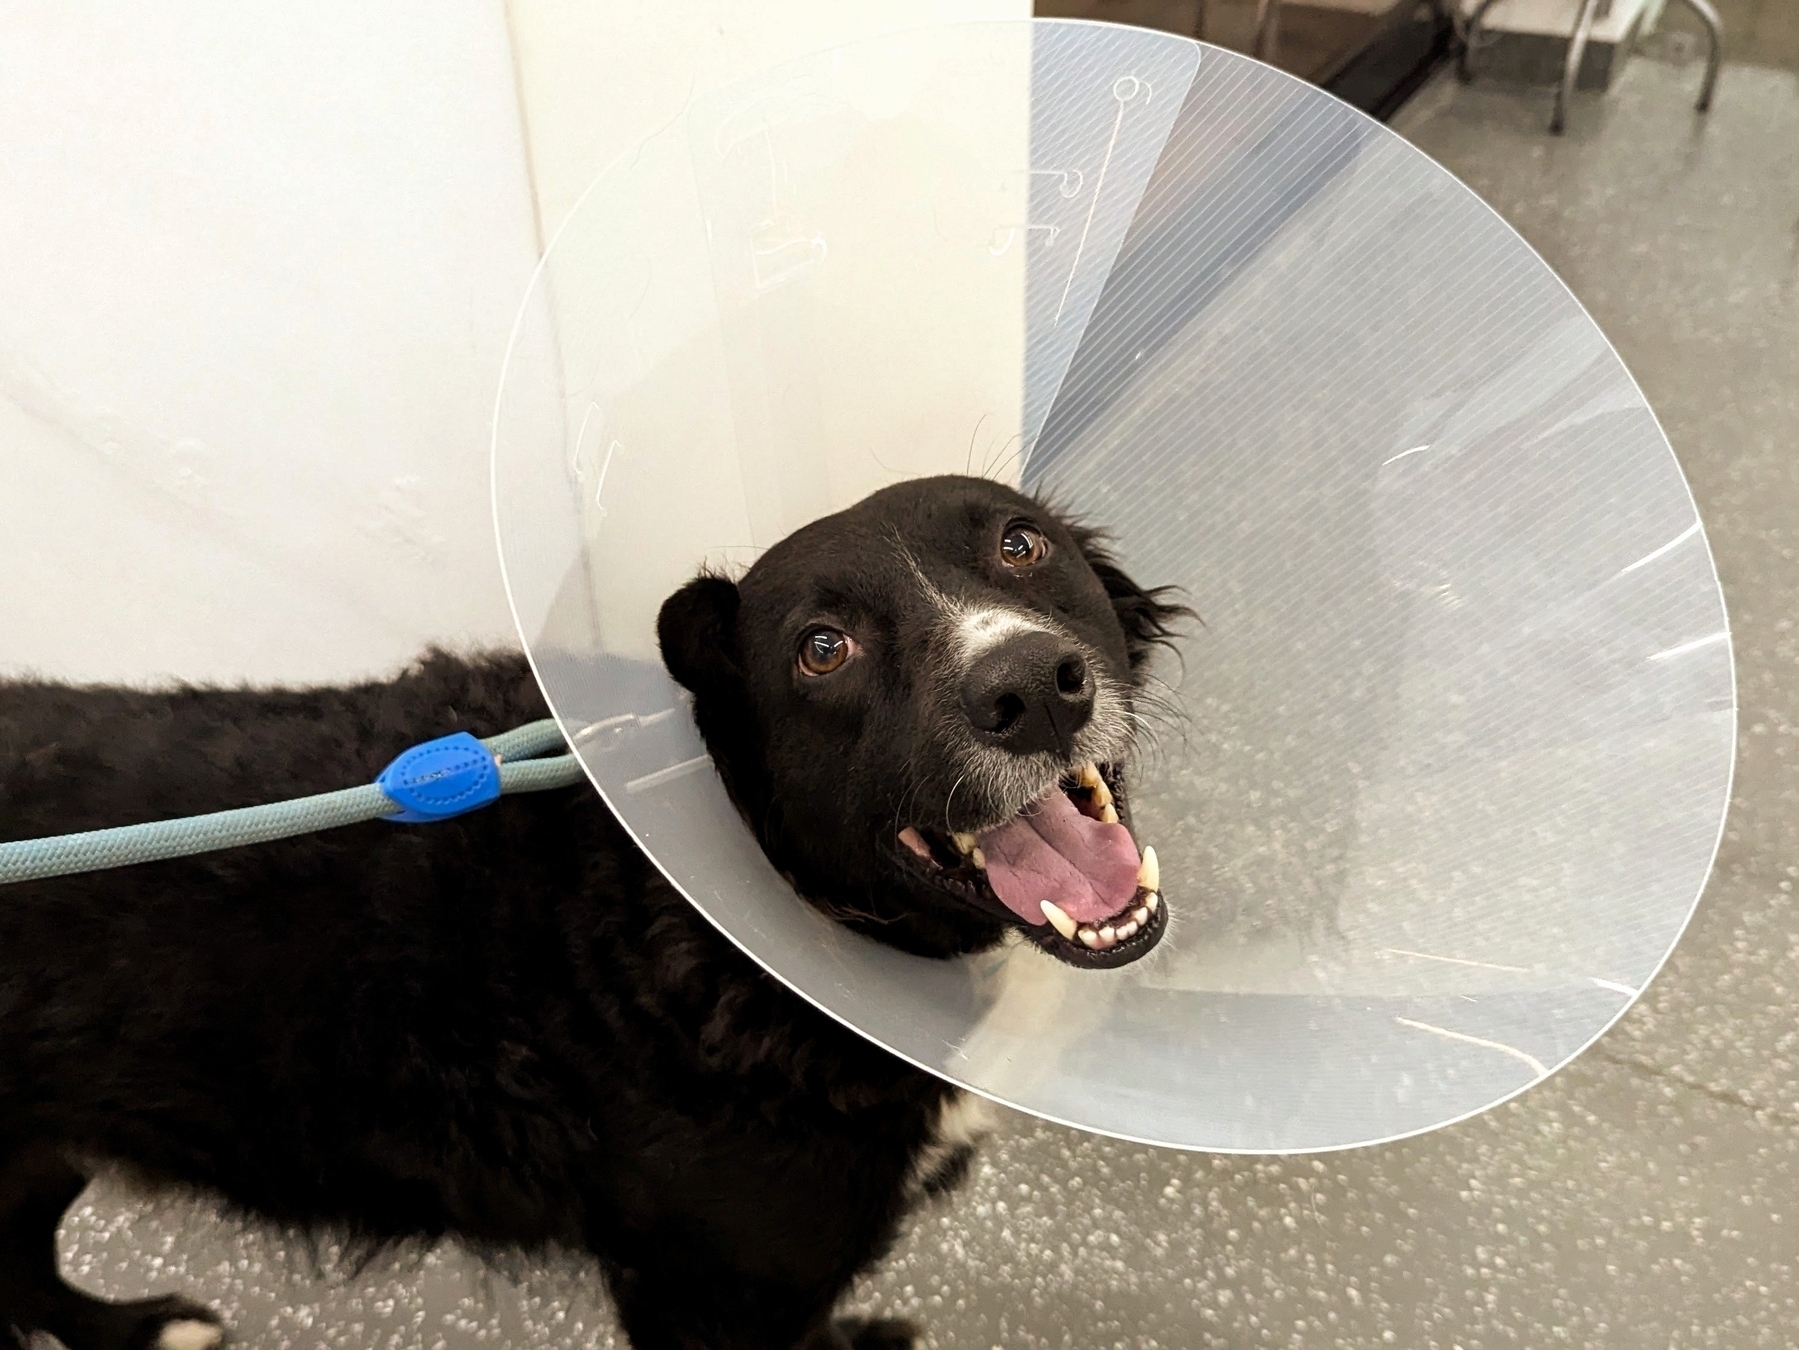 A black dog with a white patch on its chest is wearing a plastic cone and has a happy expression while standing on a leash.